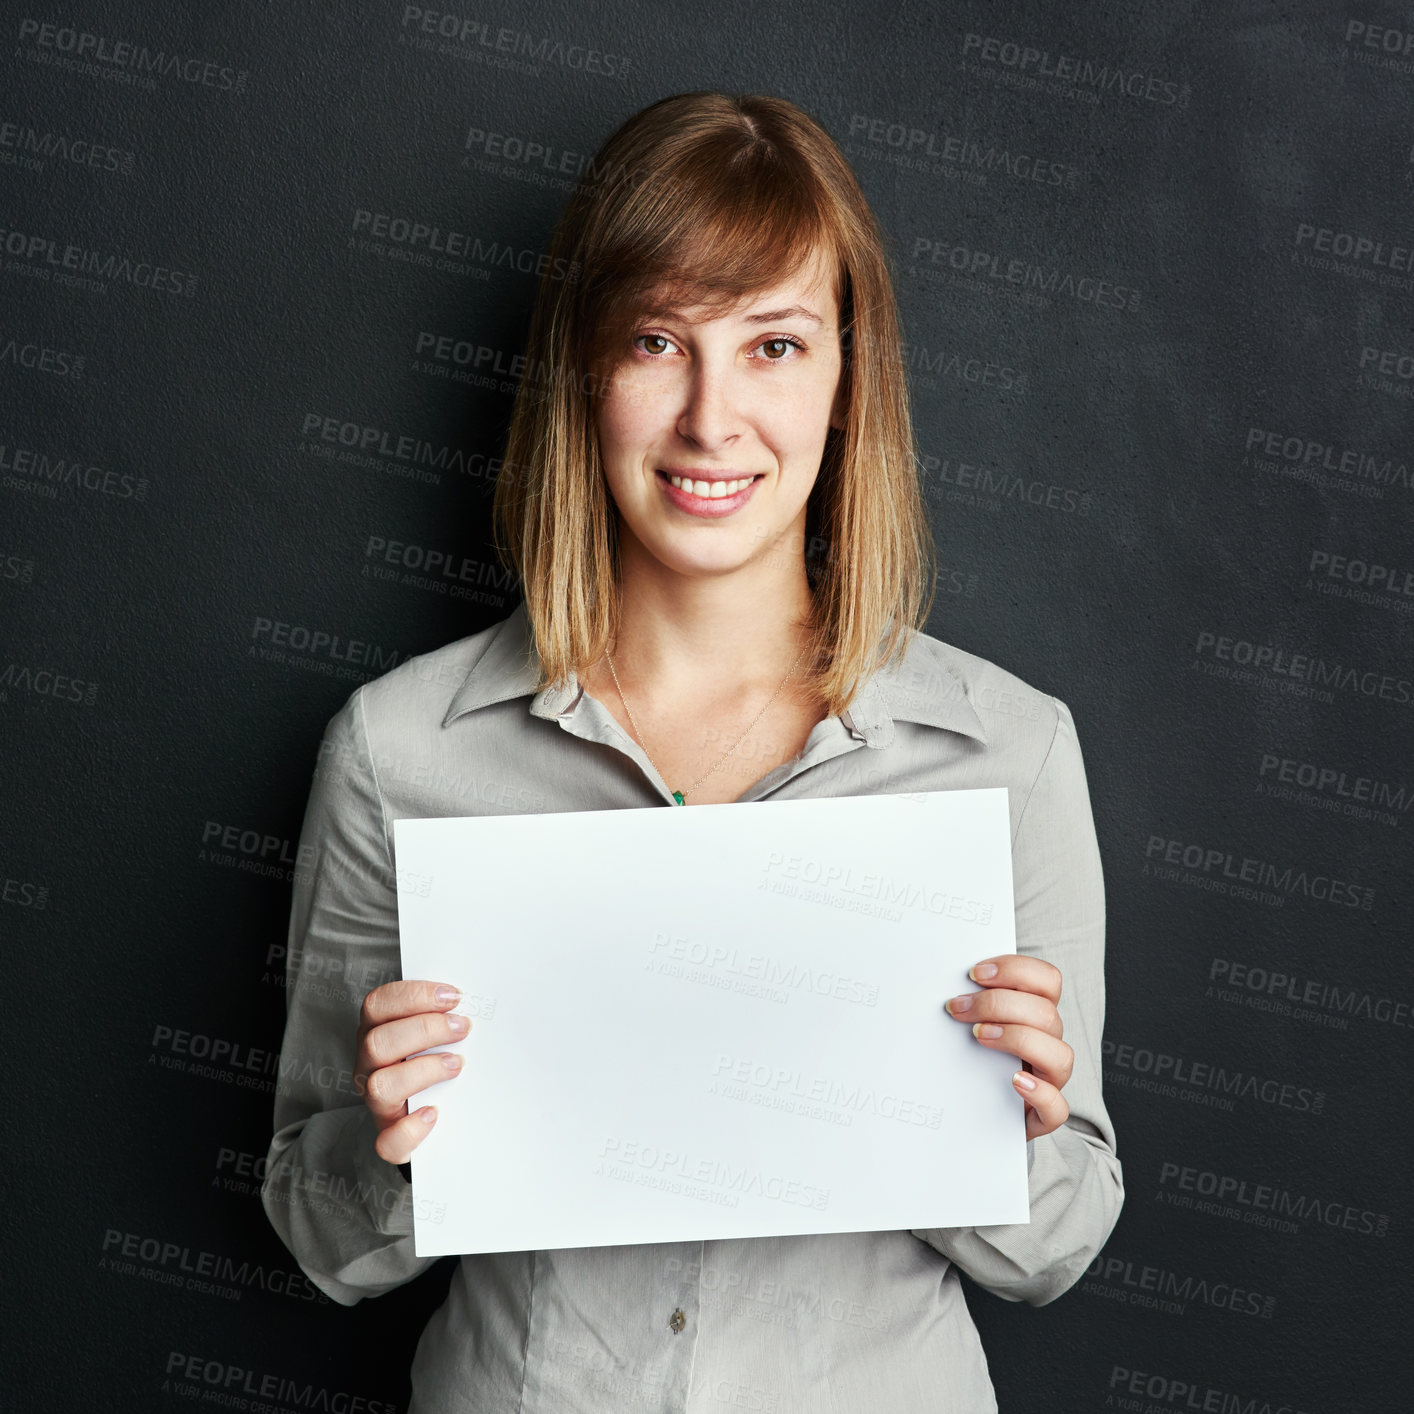 Buy stock photo Portrait, poster and mock up with a woman in studio on a dark background holding a blank sign. Announcement, information or advertising with a female brand ambassador showing empty space on a placard